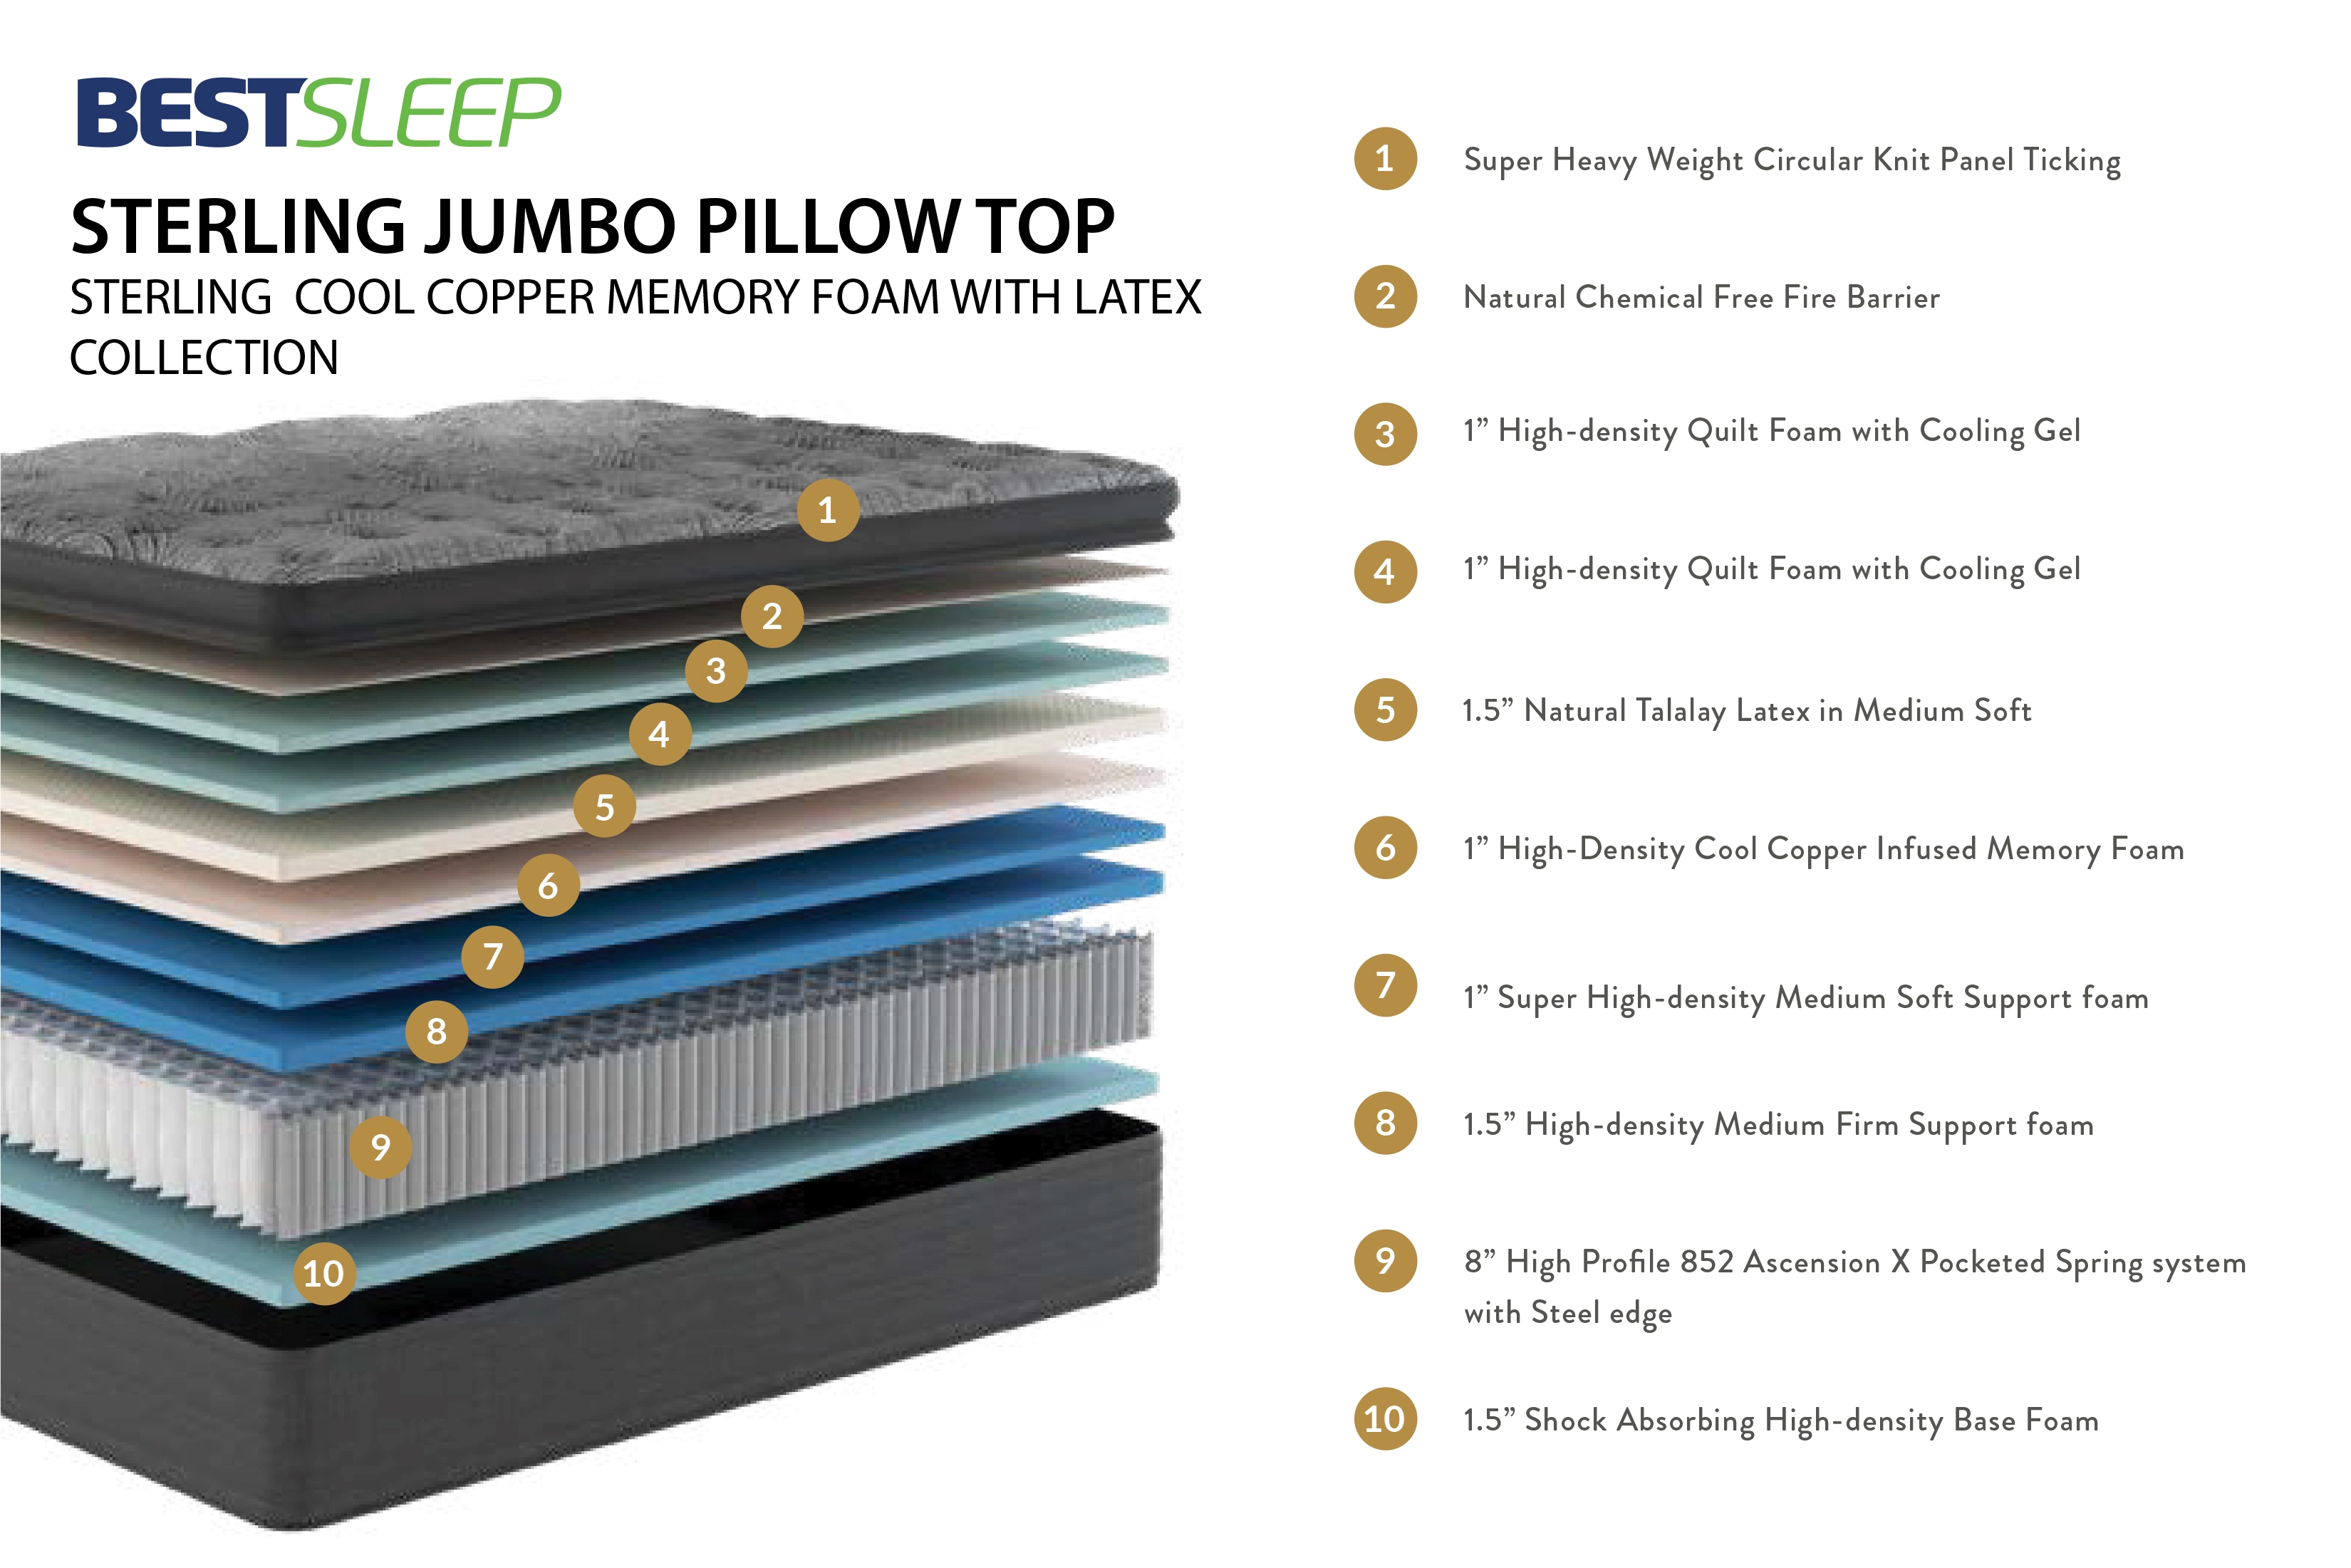 BestSleep Sterling Jumbo Pillow Top. Sterling cool copper memory foam with latex collection. 10 layers with foam, cooling gel and springs.